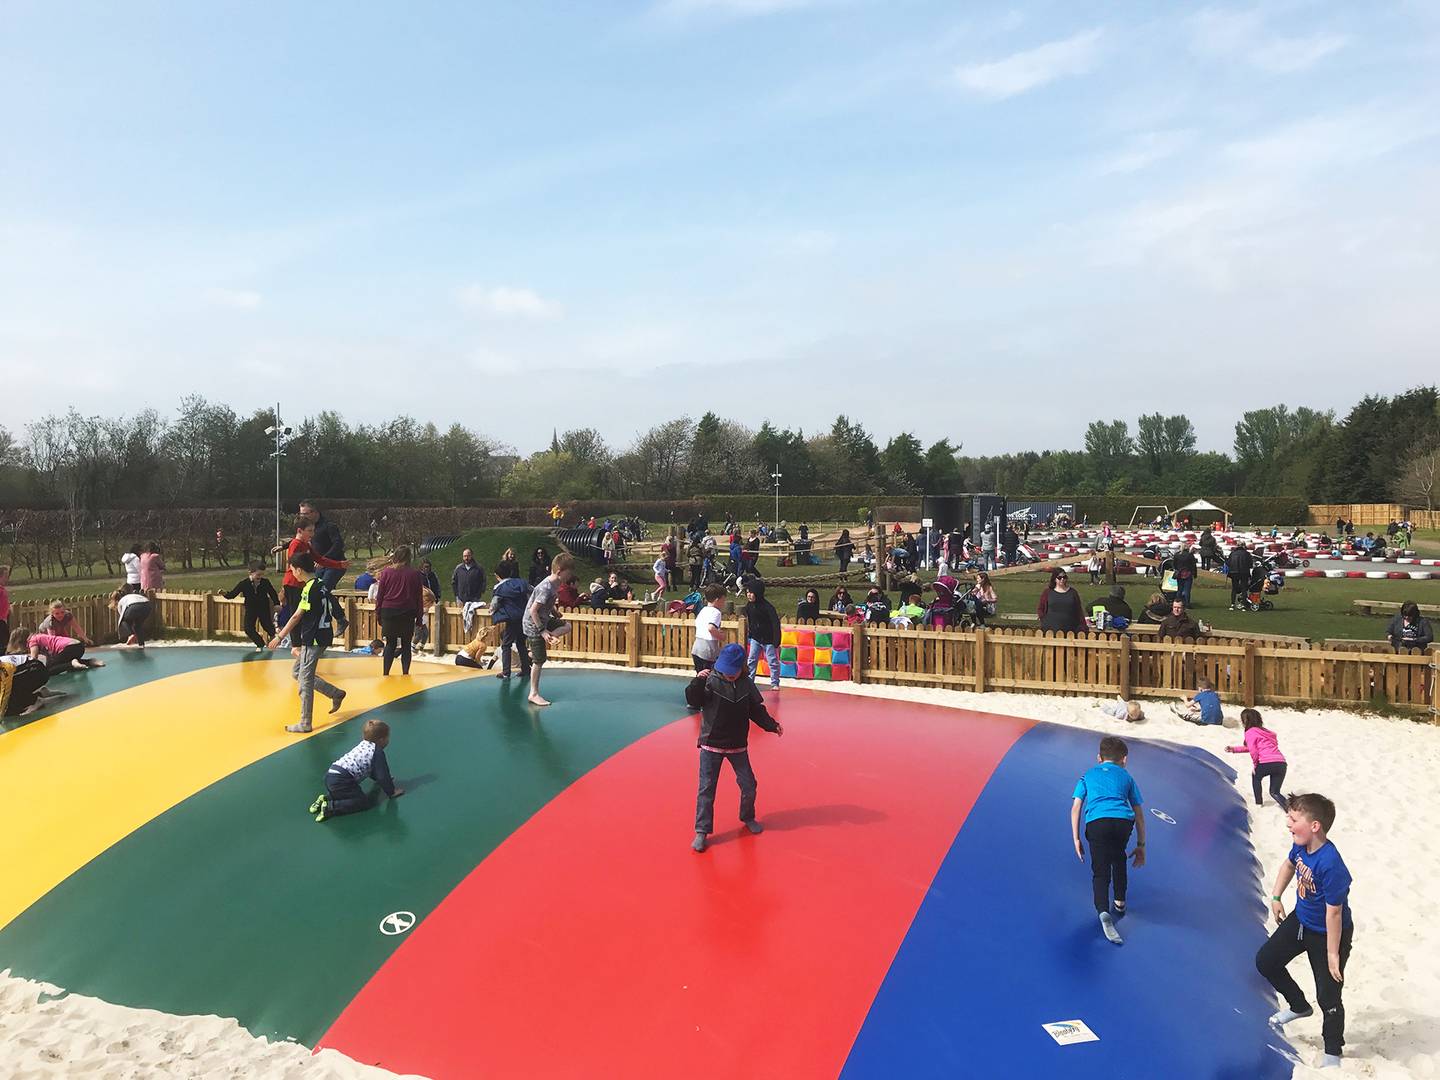 Conifox Adventure Park with people bouncing on giant colourful bouncy pillow